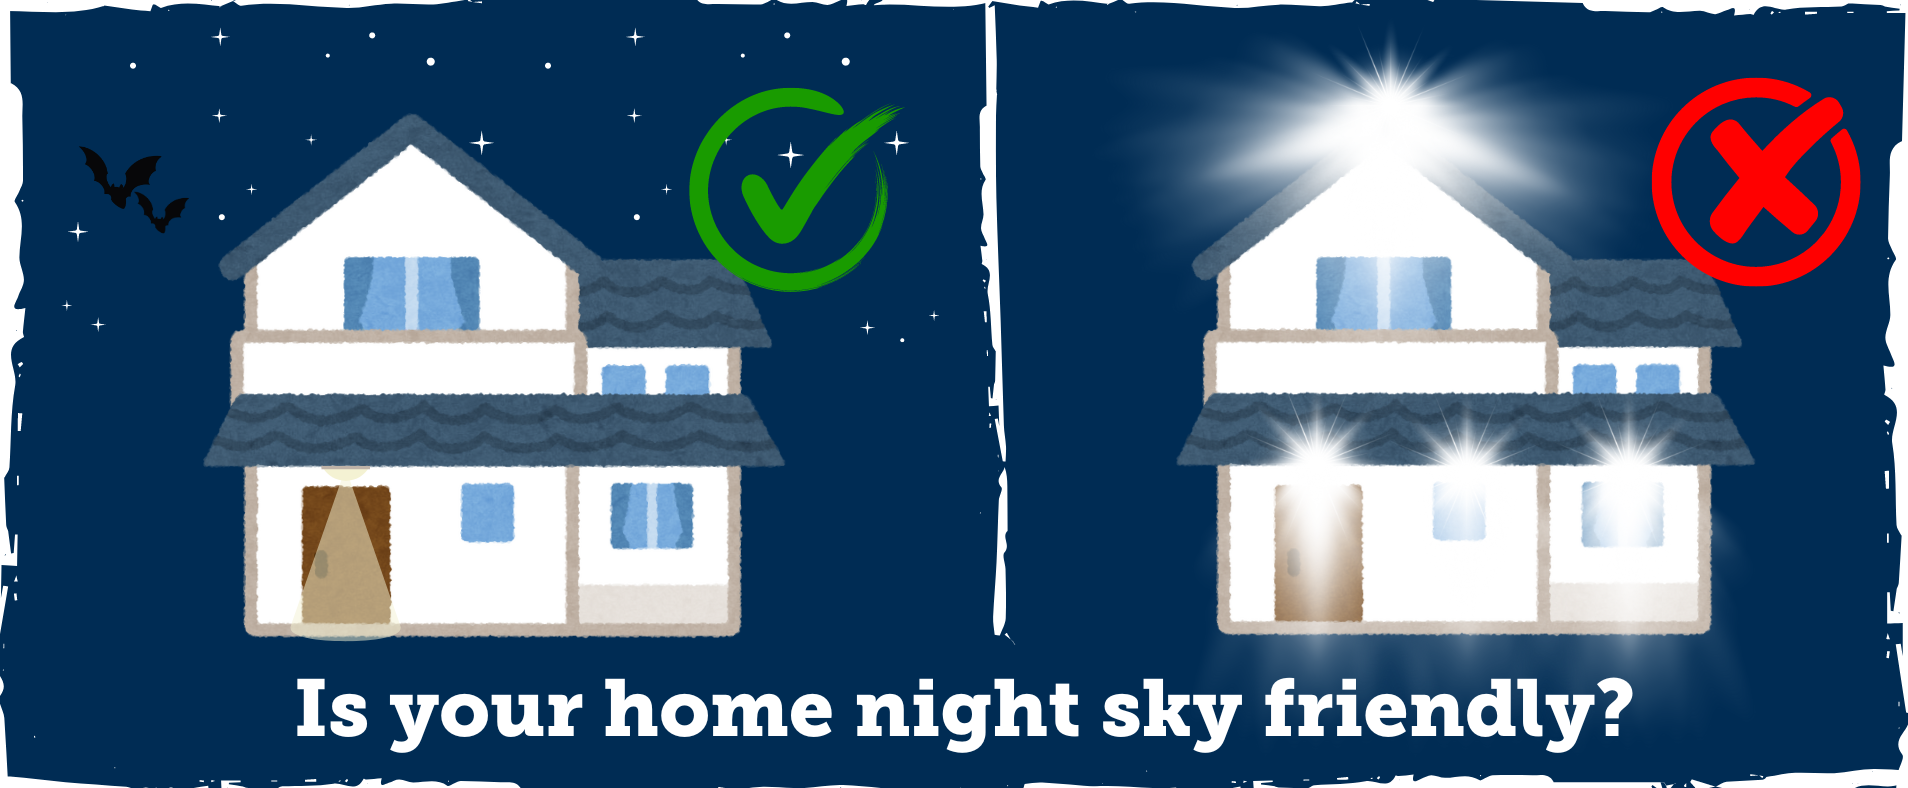 A graphic showing two houses—one emitting just one small, narrowly directed soft light under a starry sky, and the other emitting several bright white lights with no stars visible above.